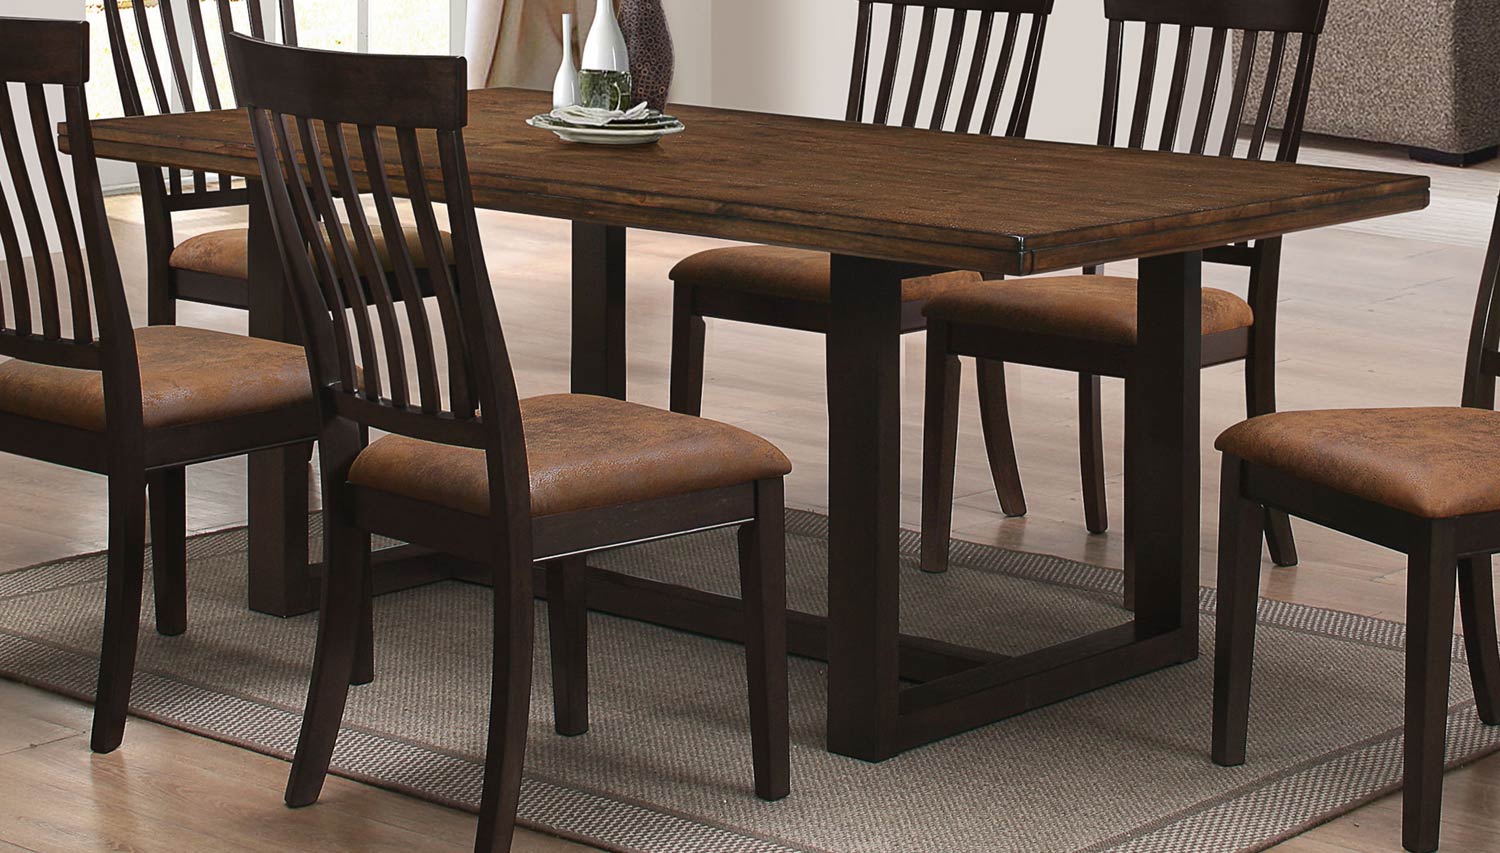 Coaster Wood River Dining Table - Two tone rustic Amber & Charcoal